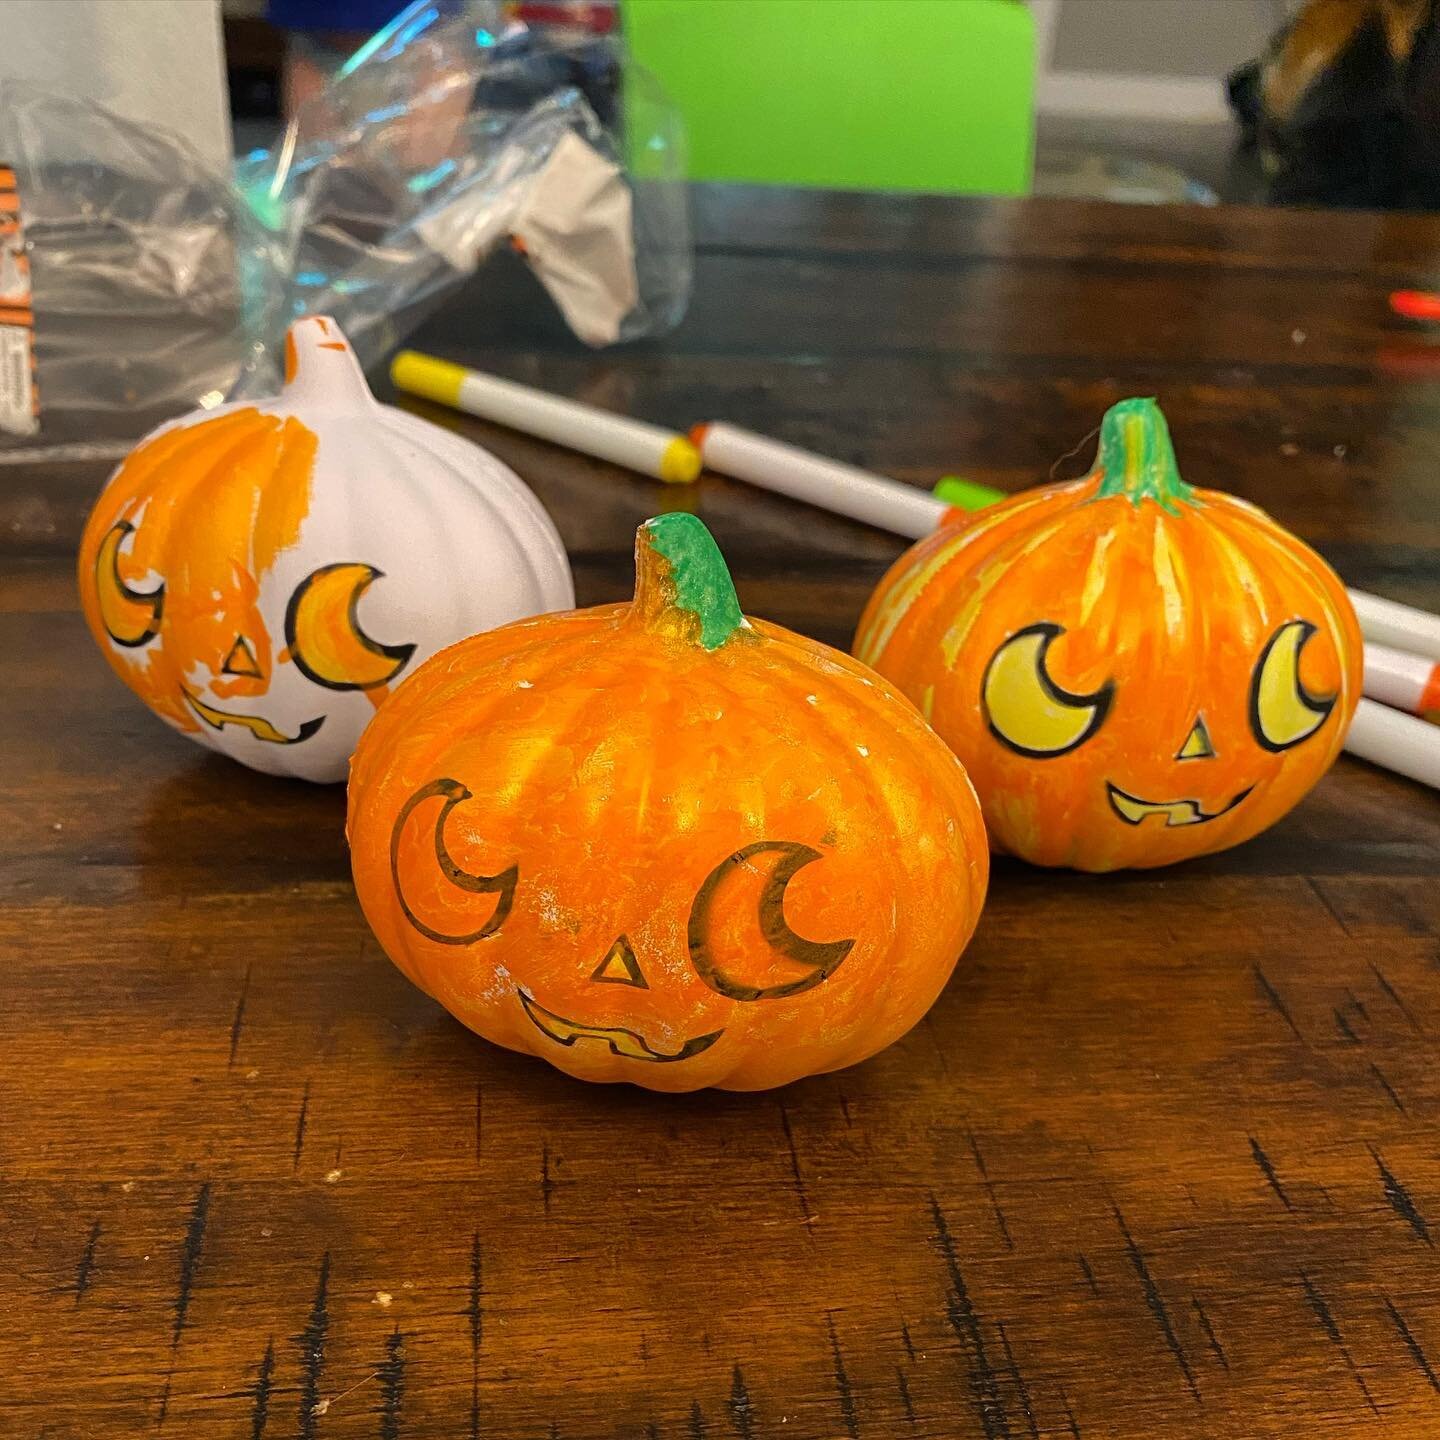 Crafty day! Found these squishy pumpkins and paint marker sets in the Target 🎯 One Spot for 3 bucks each.